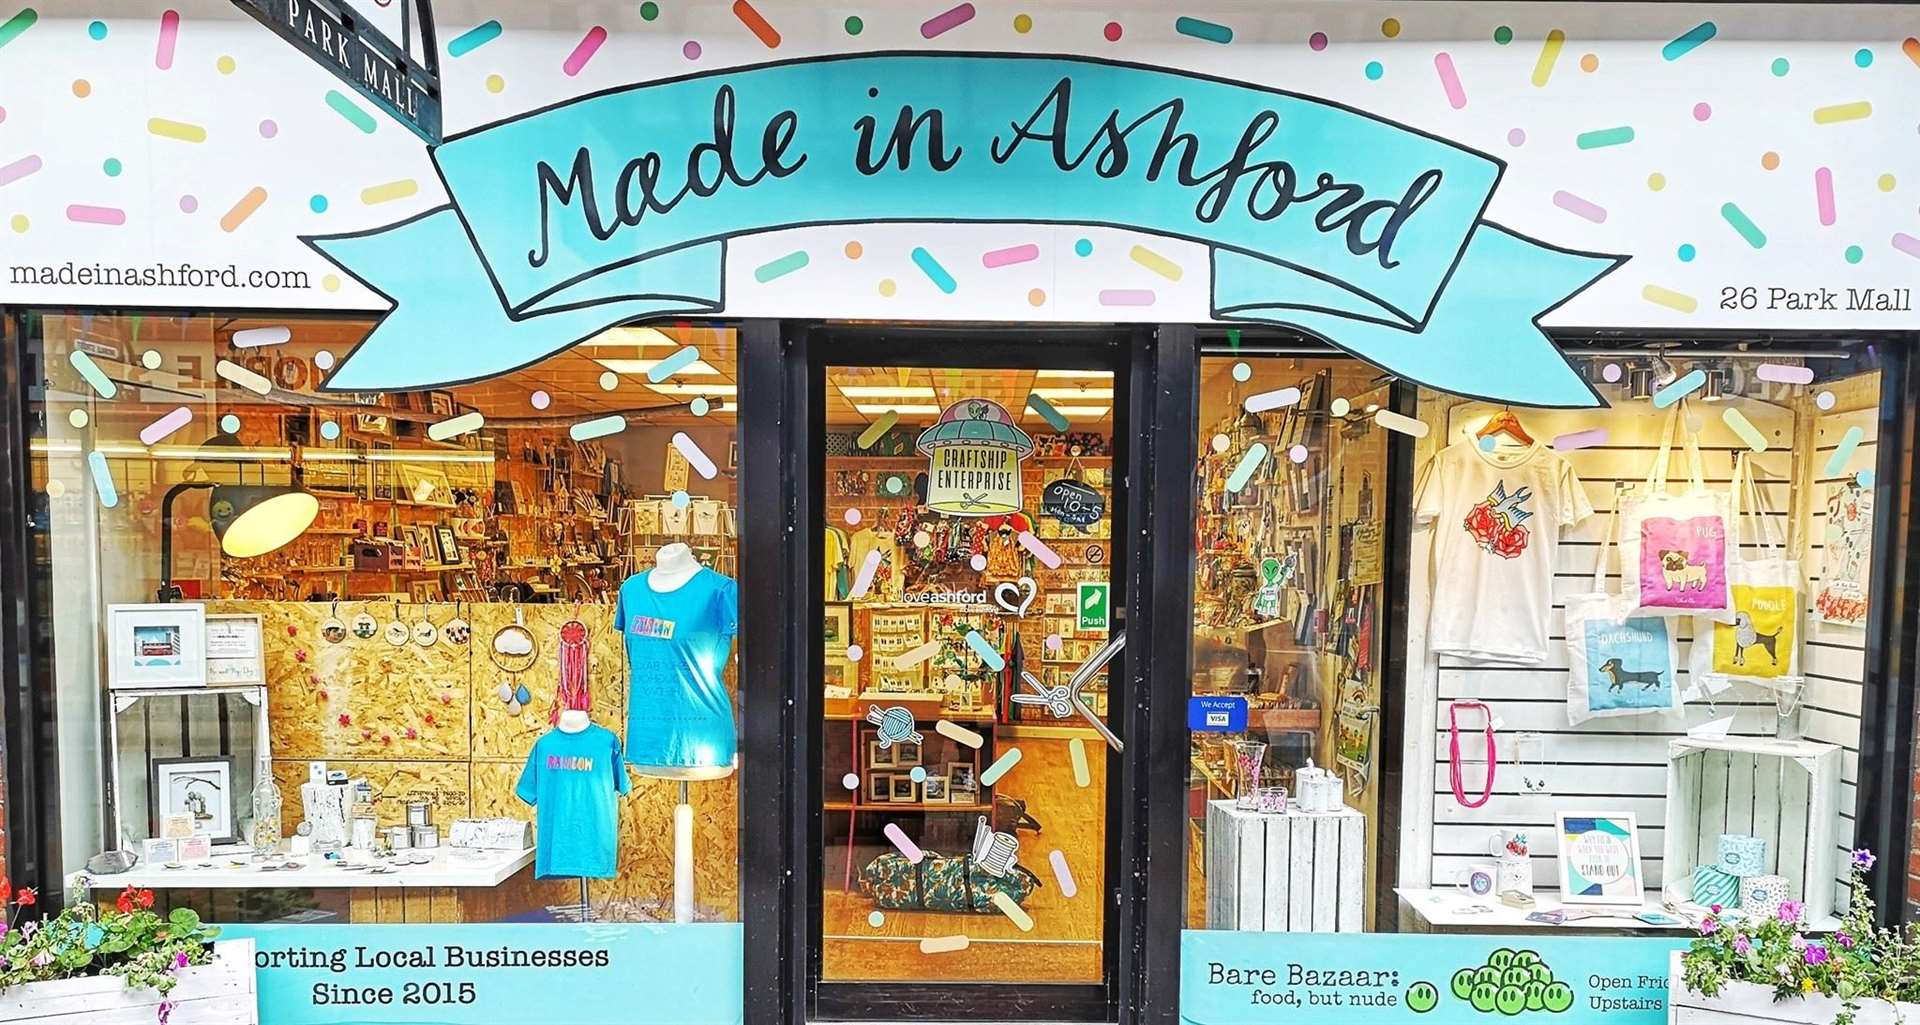 Made in Ashford has proved a hit since first opening as a pop-up in 2015